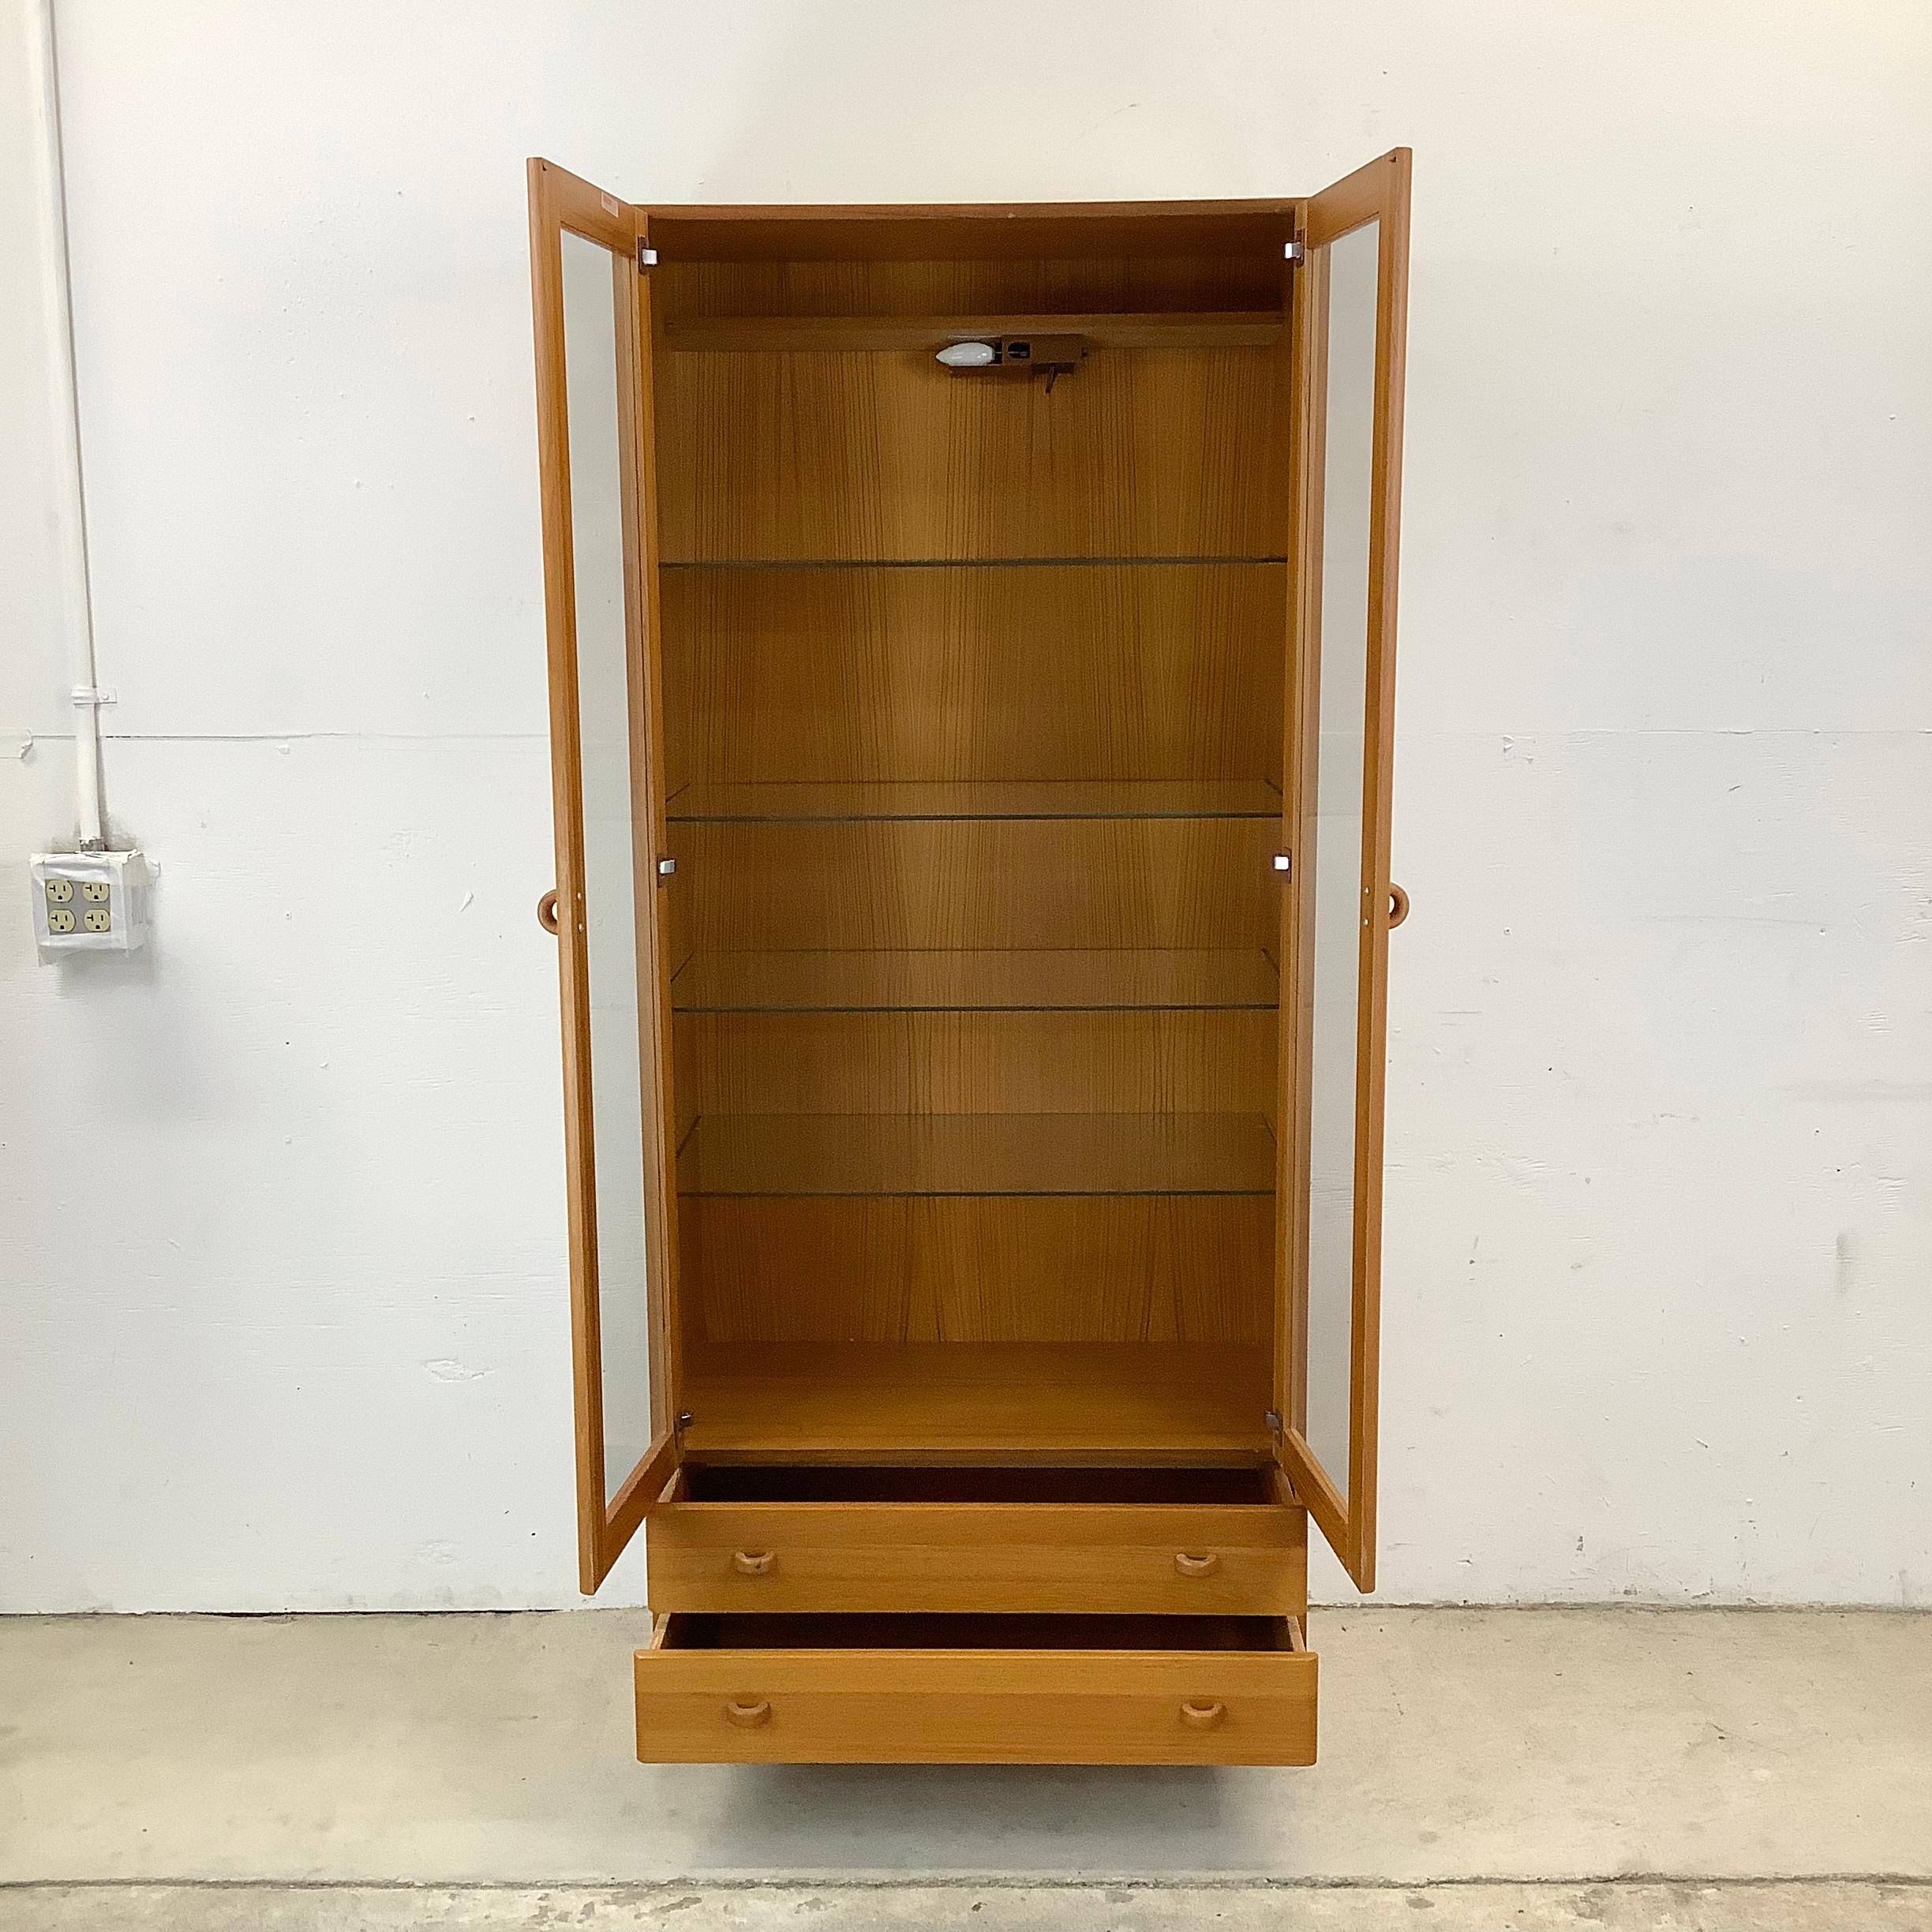 Step into the realm of timeless Scandinavian design with this magnificent teak bookcase cabinet from Domino Mobler. The understated elegance and quintessential mid-century modern aesthetic of this piece radiates a warm, inviting atmosphere that only